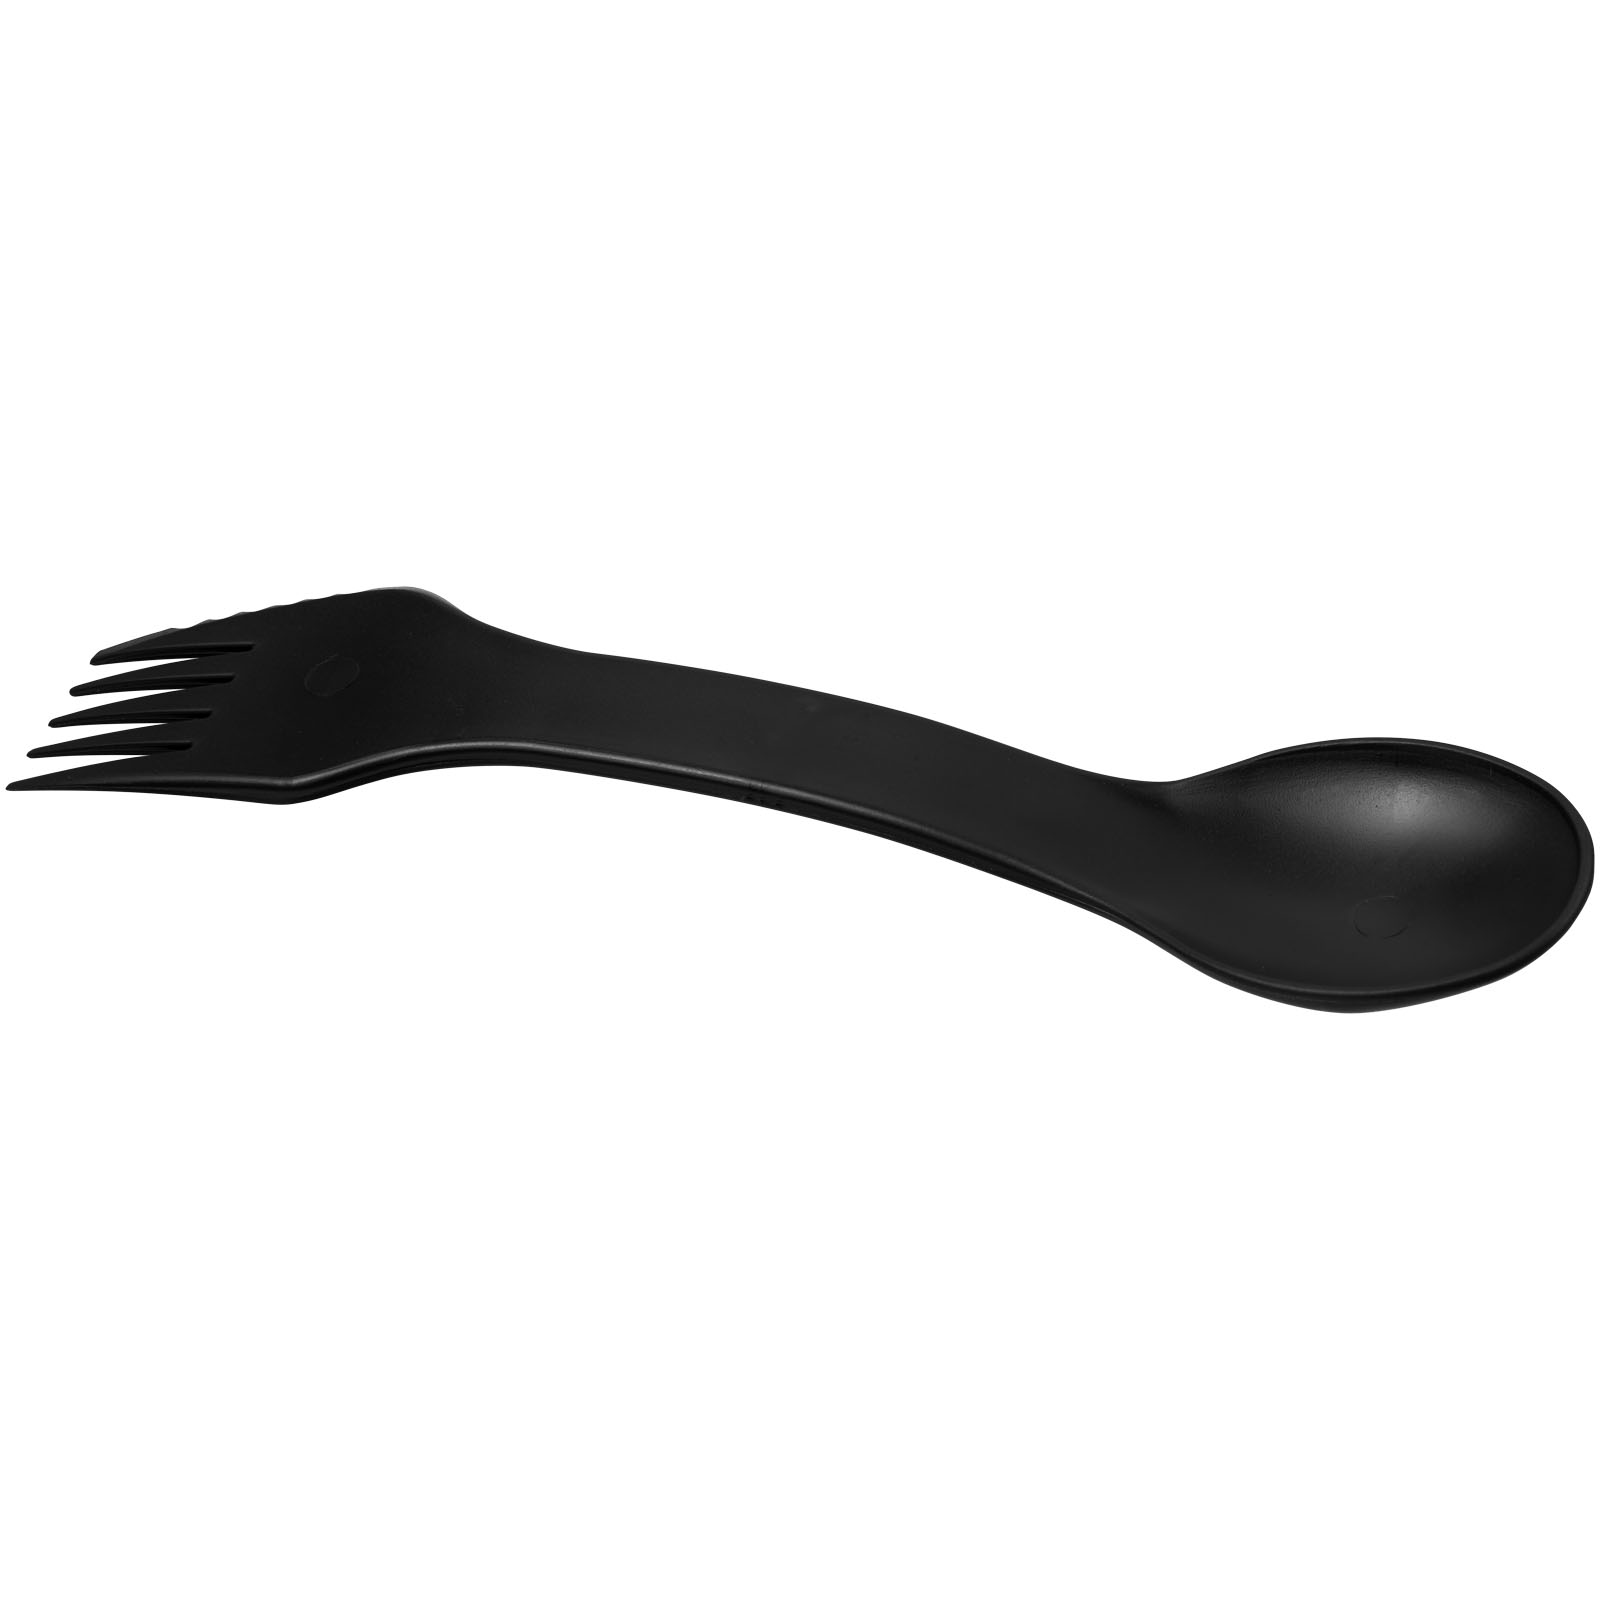 Advertising Kitchenware - Epsy 3-in-1 spoon, fork, and knife